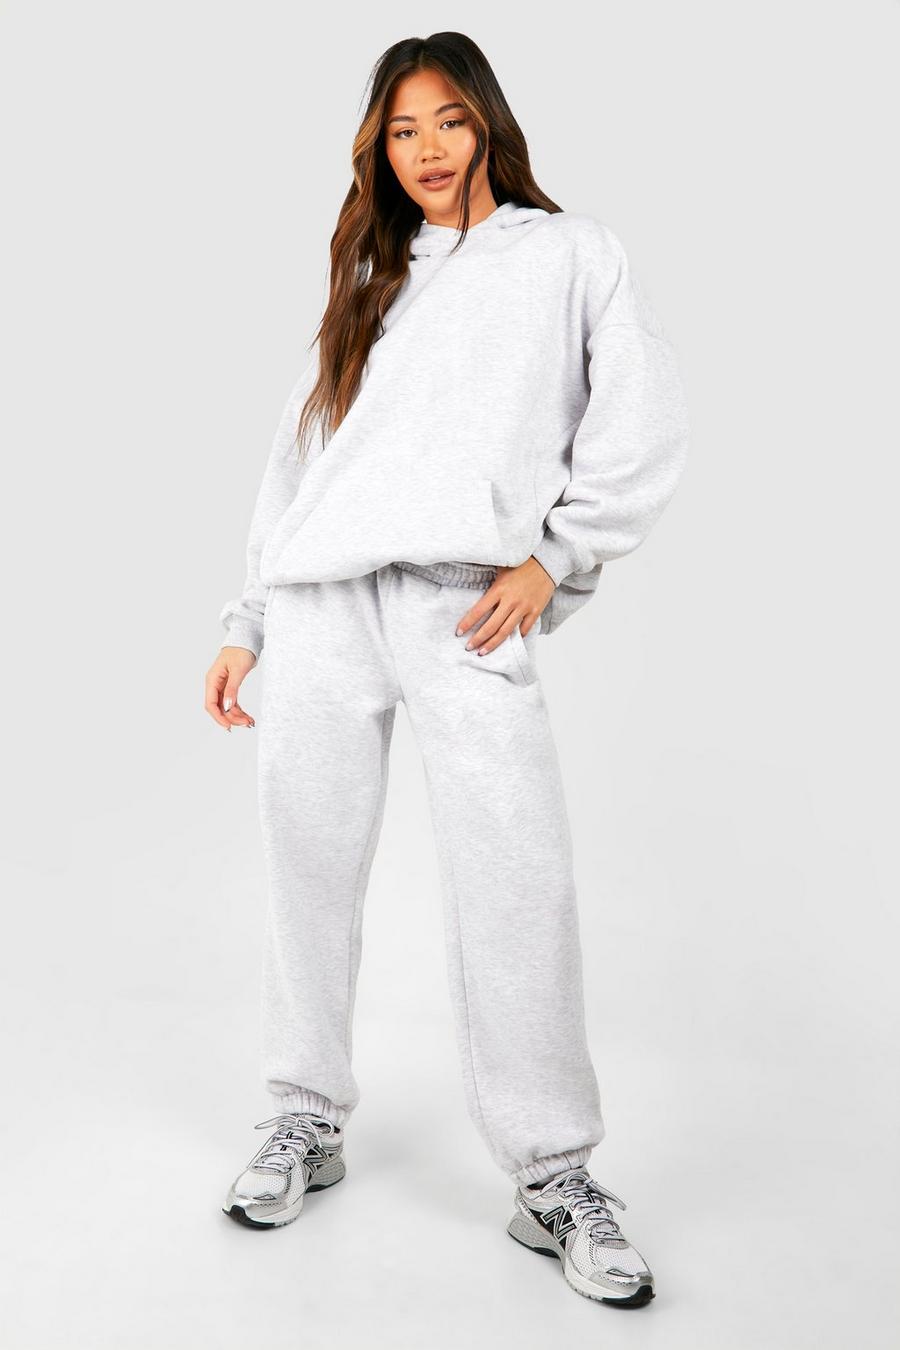 Ash grey Dsgn Studio Hooded Cuffed Jogger Tracksuit